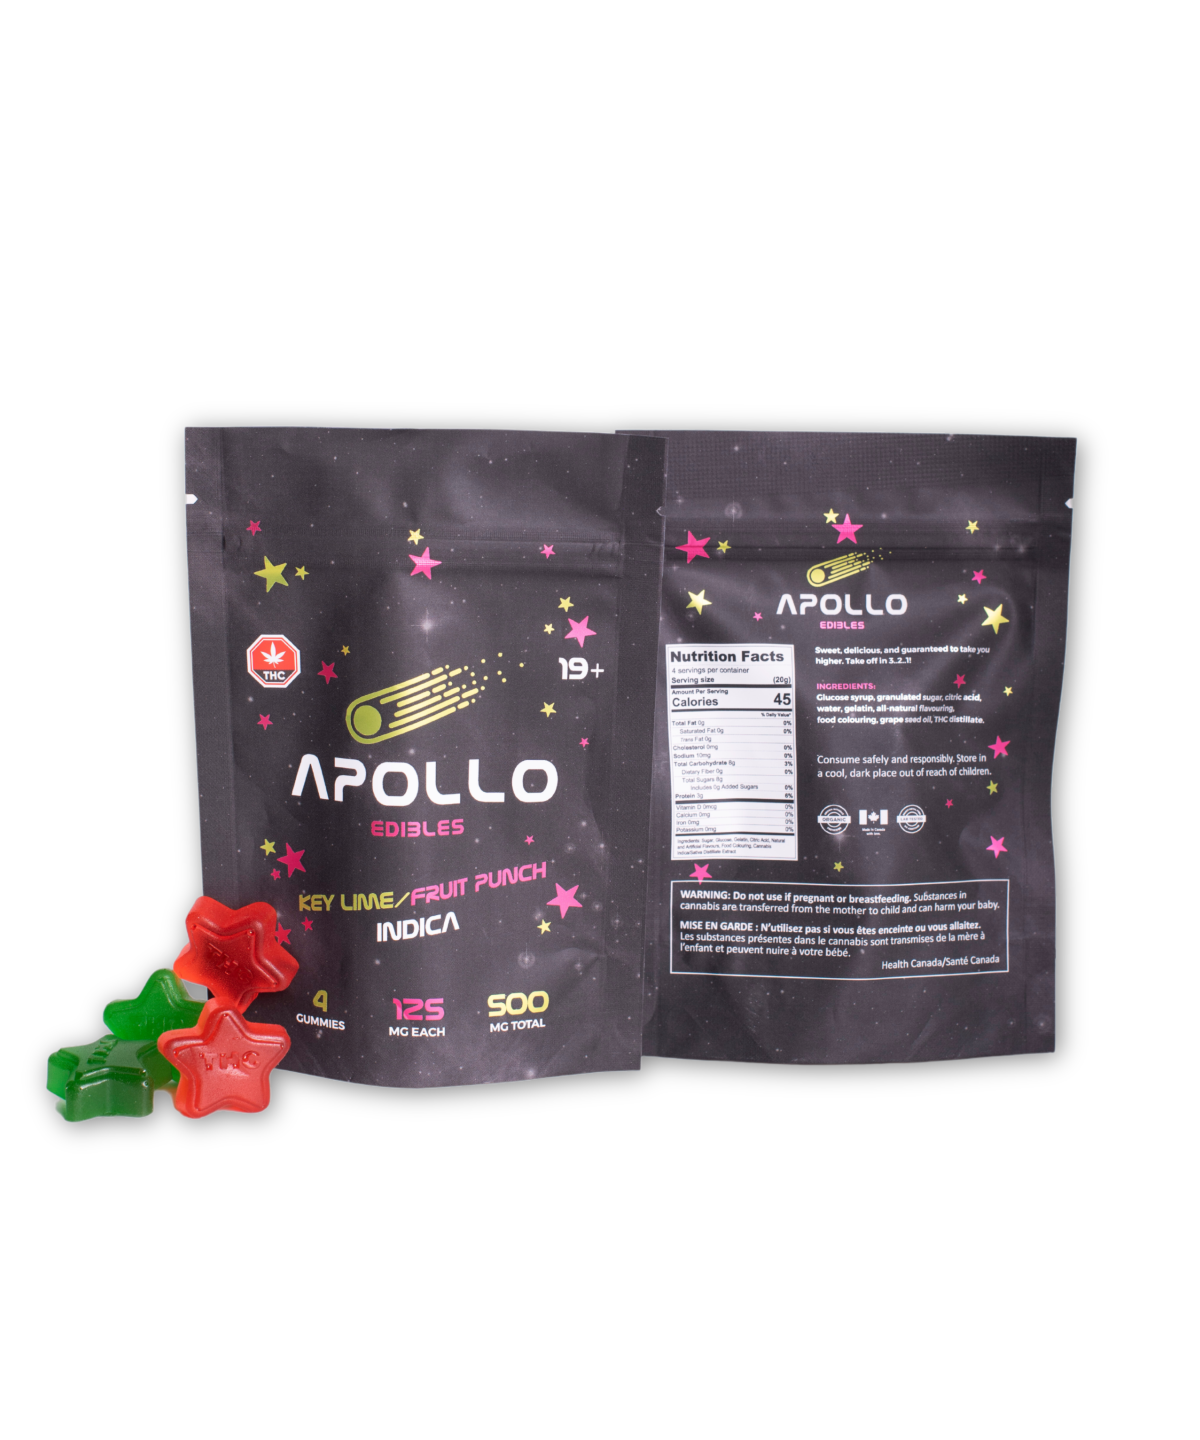 Buy Apollo Key Lime/Fruit Punch Shooting Stars Gummies 500MG THC (INDICA) at MMJ Express Online Shop